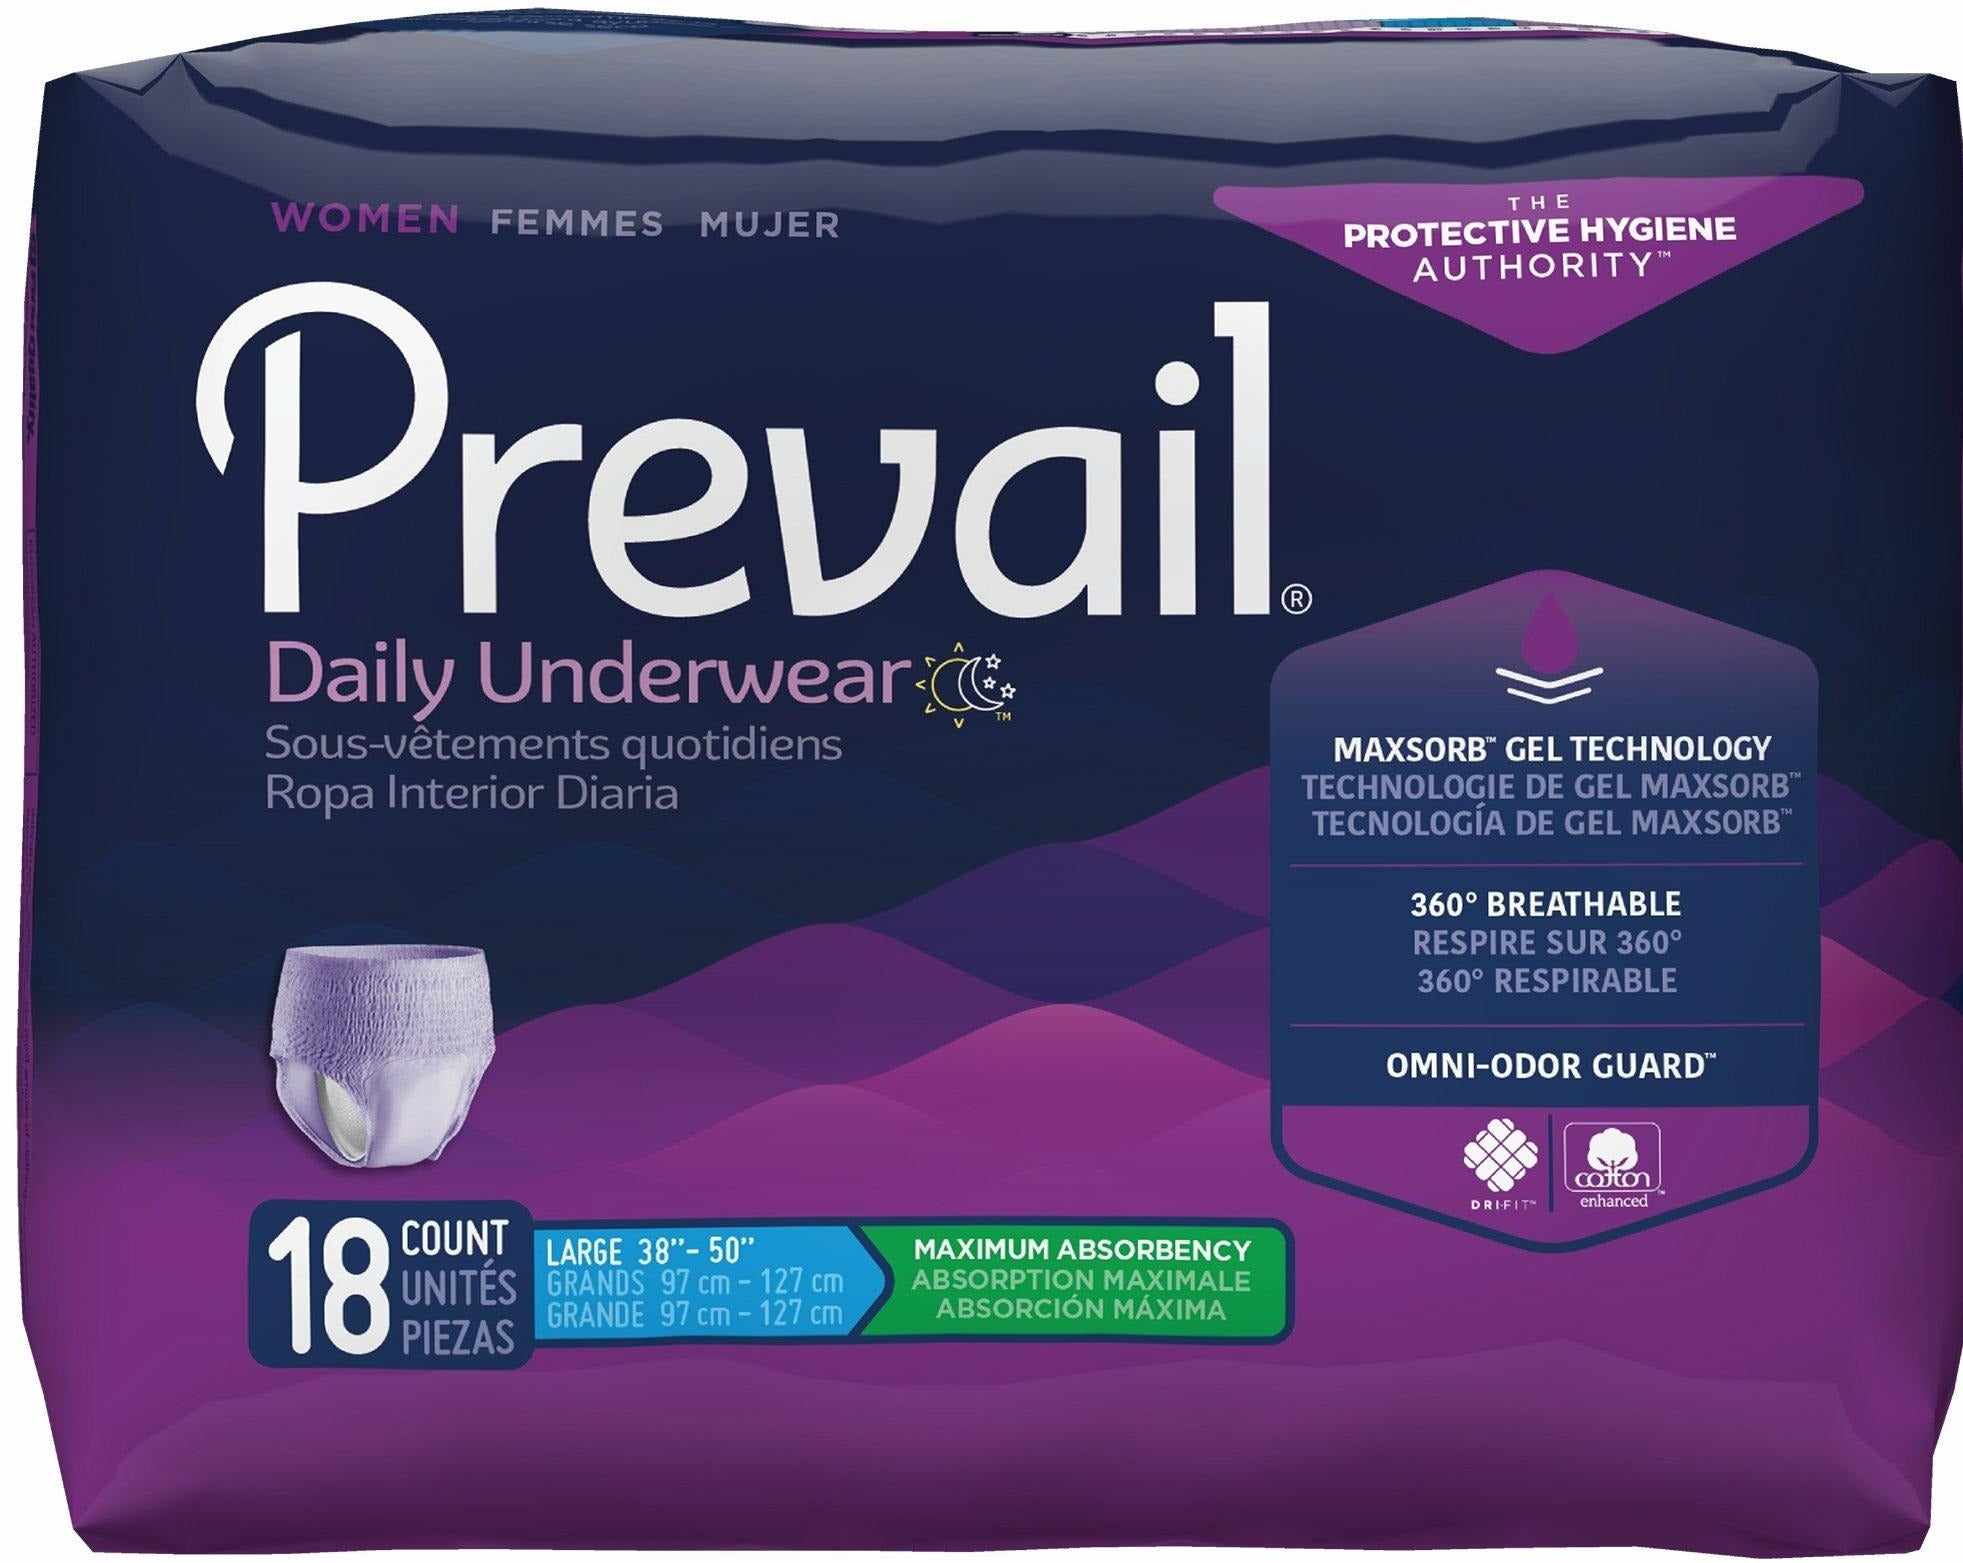 Prevail Per-fit Daily Underwear Large 72 pcs NEW - health and